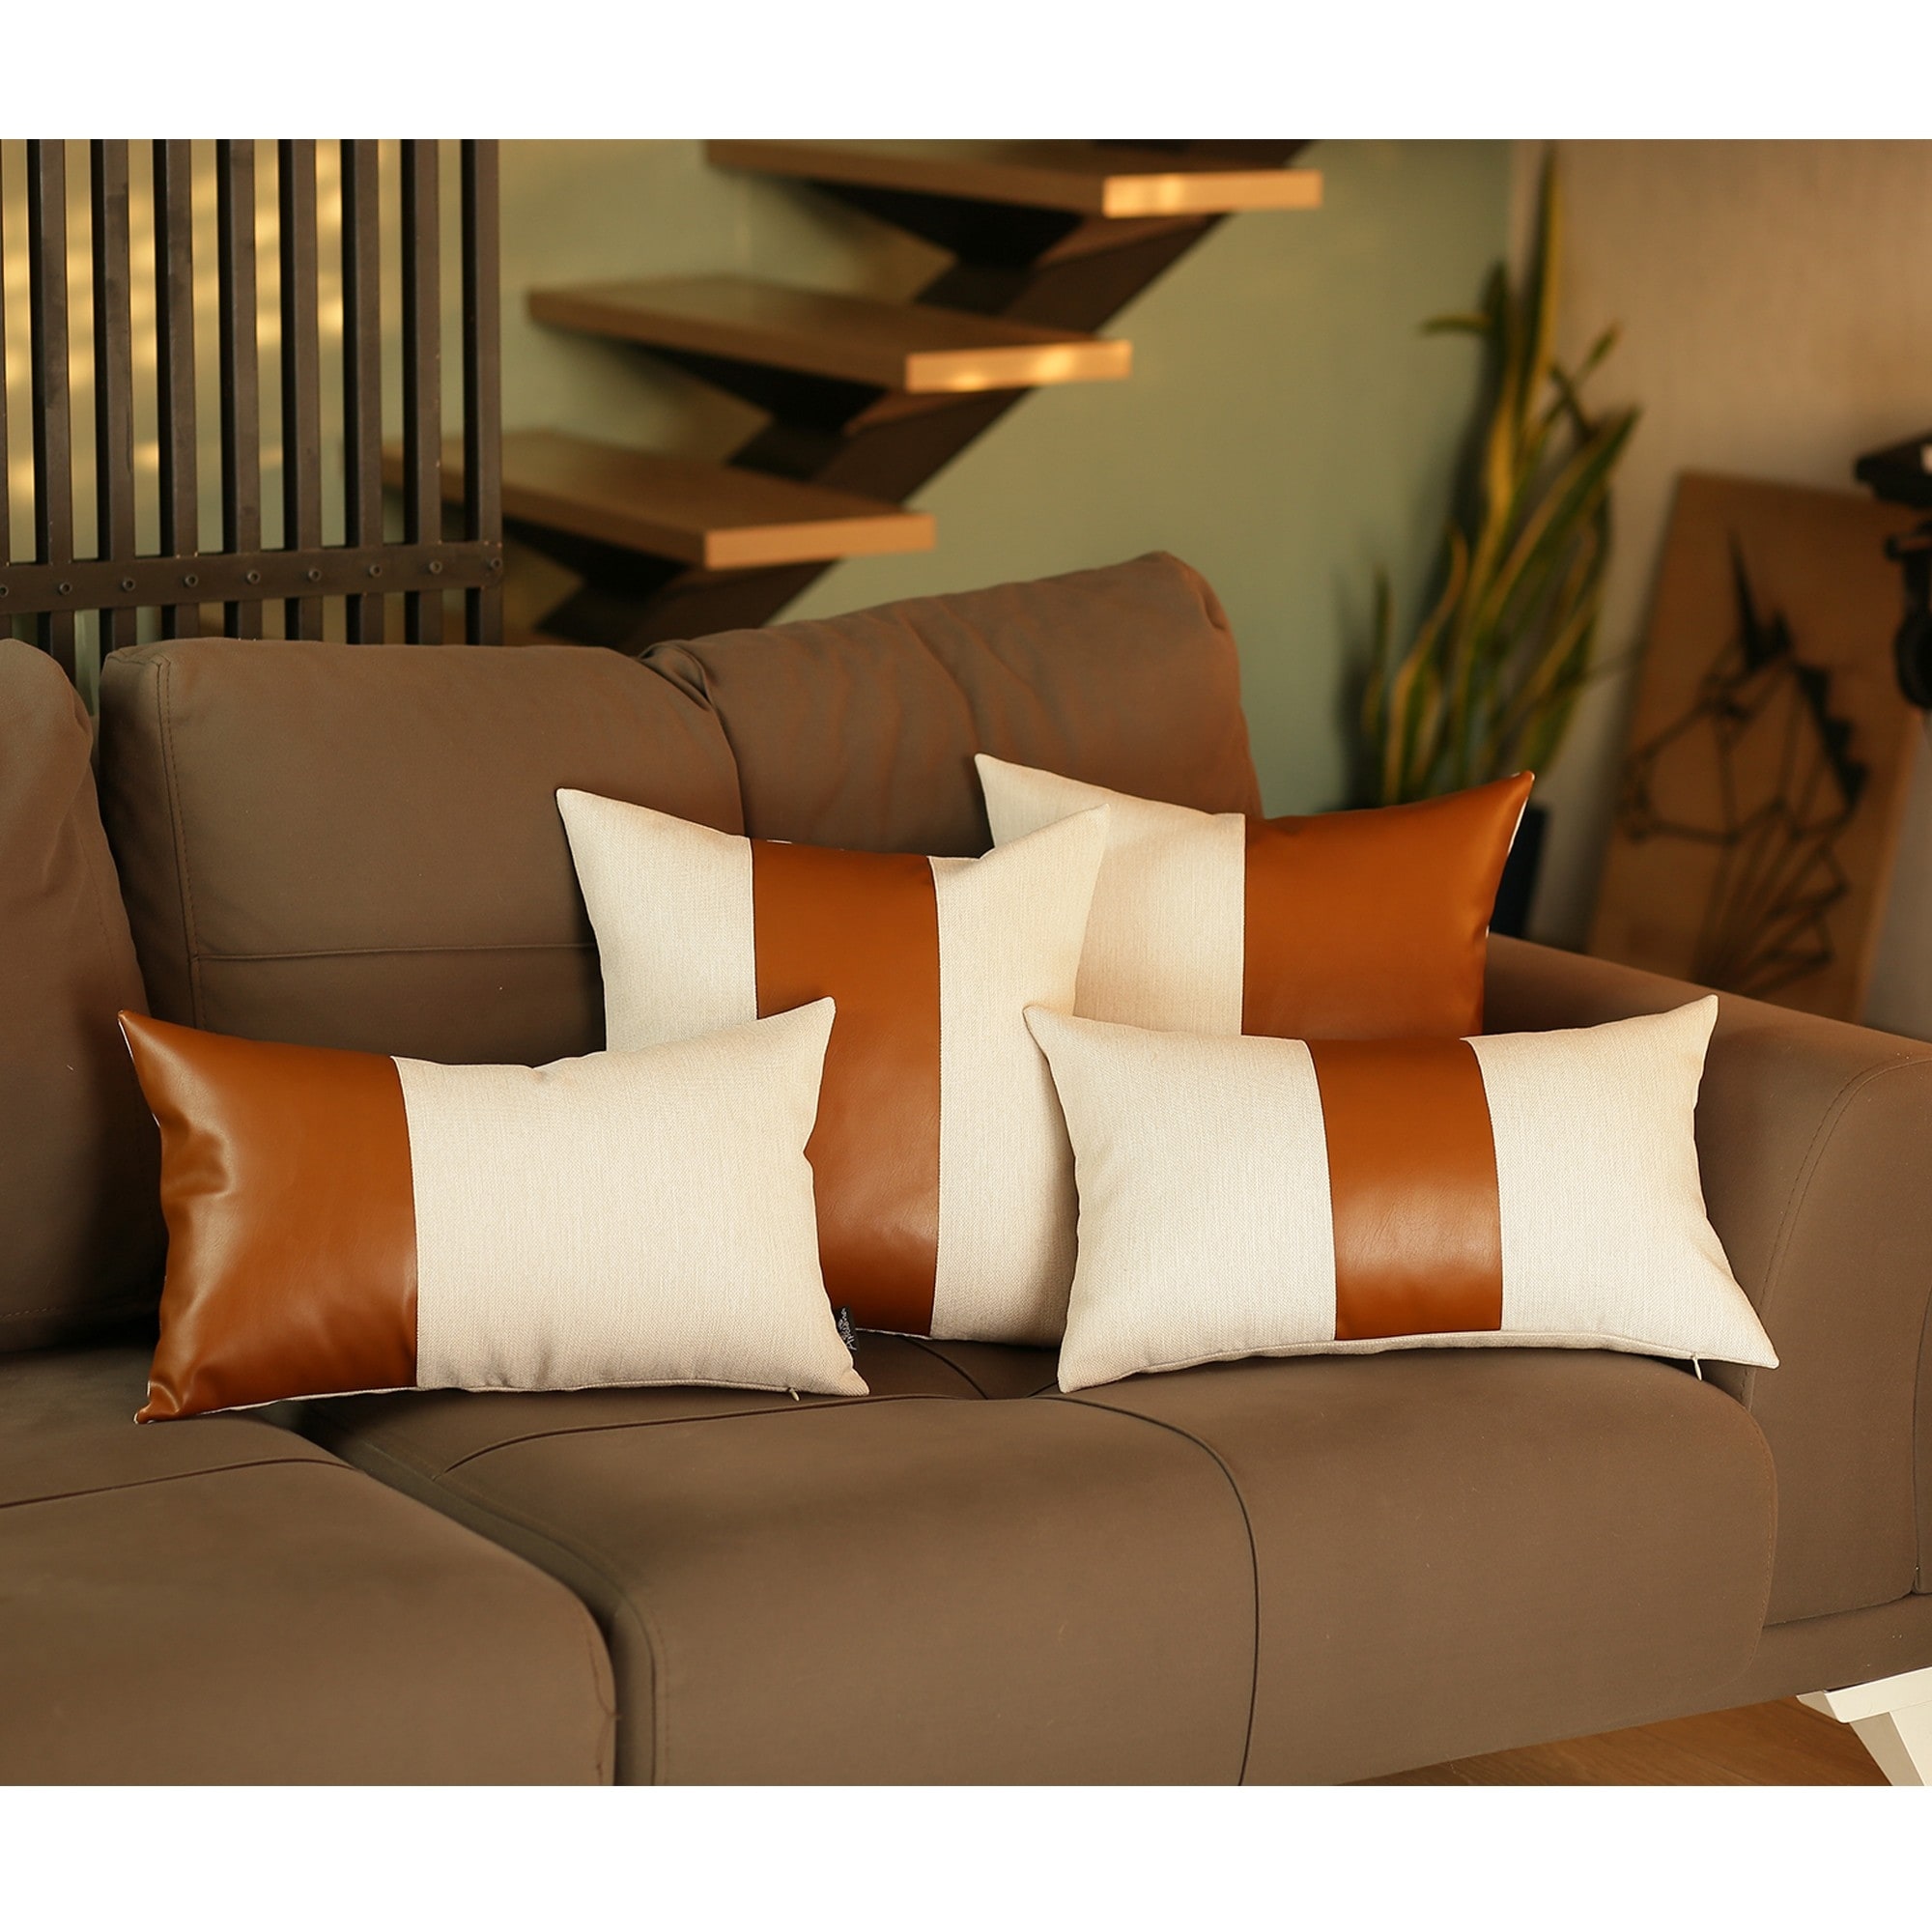 https://ak1.ostkcdn.com/images/products/is/images/direct/d2d5f63e385b1158b6e93ad6c7f821d6d5bd0cdd/Set-of-2-White-and-Brown-Faux-Leather-Lumbar-Pillow-Covers.jpg